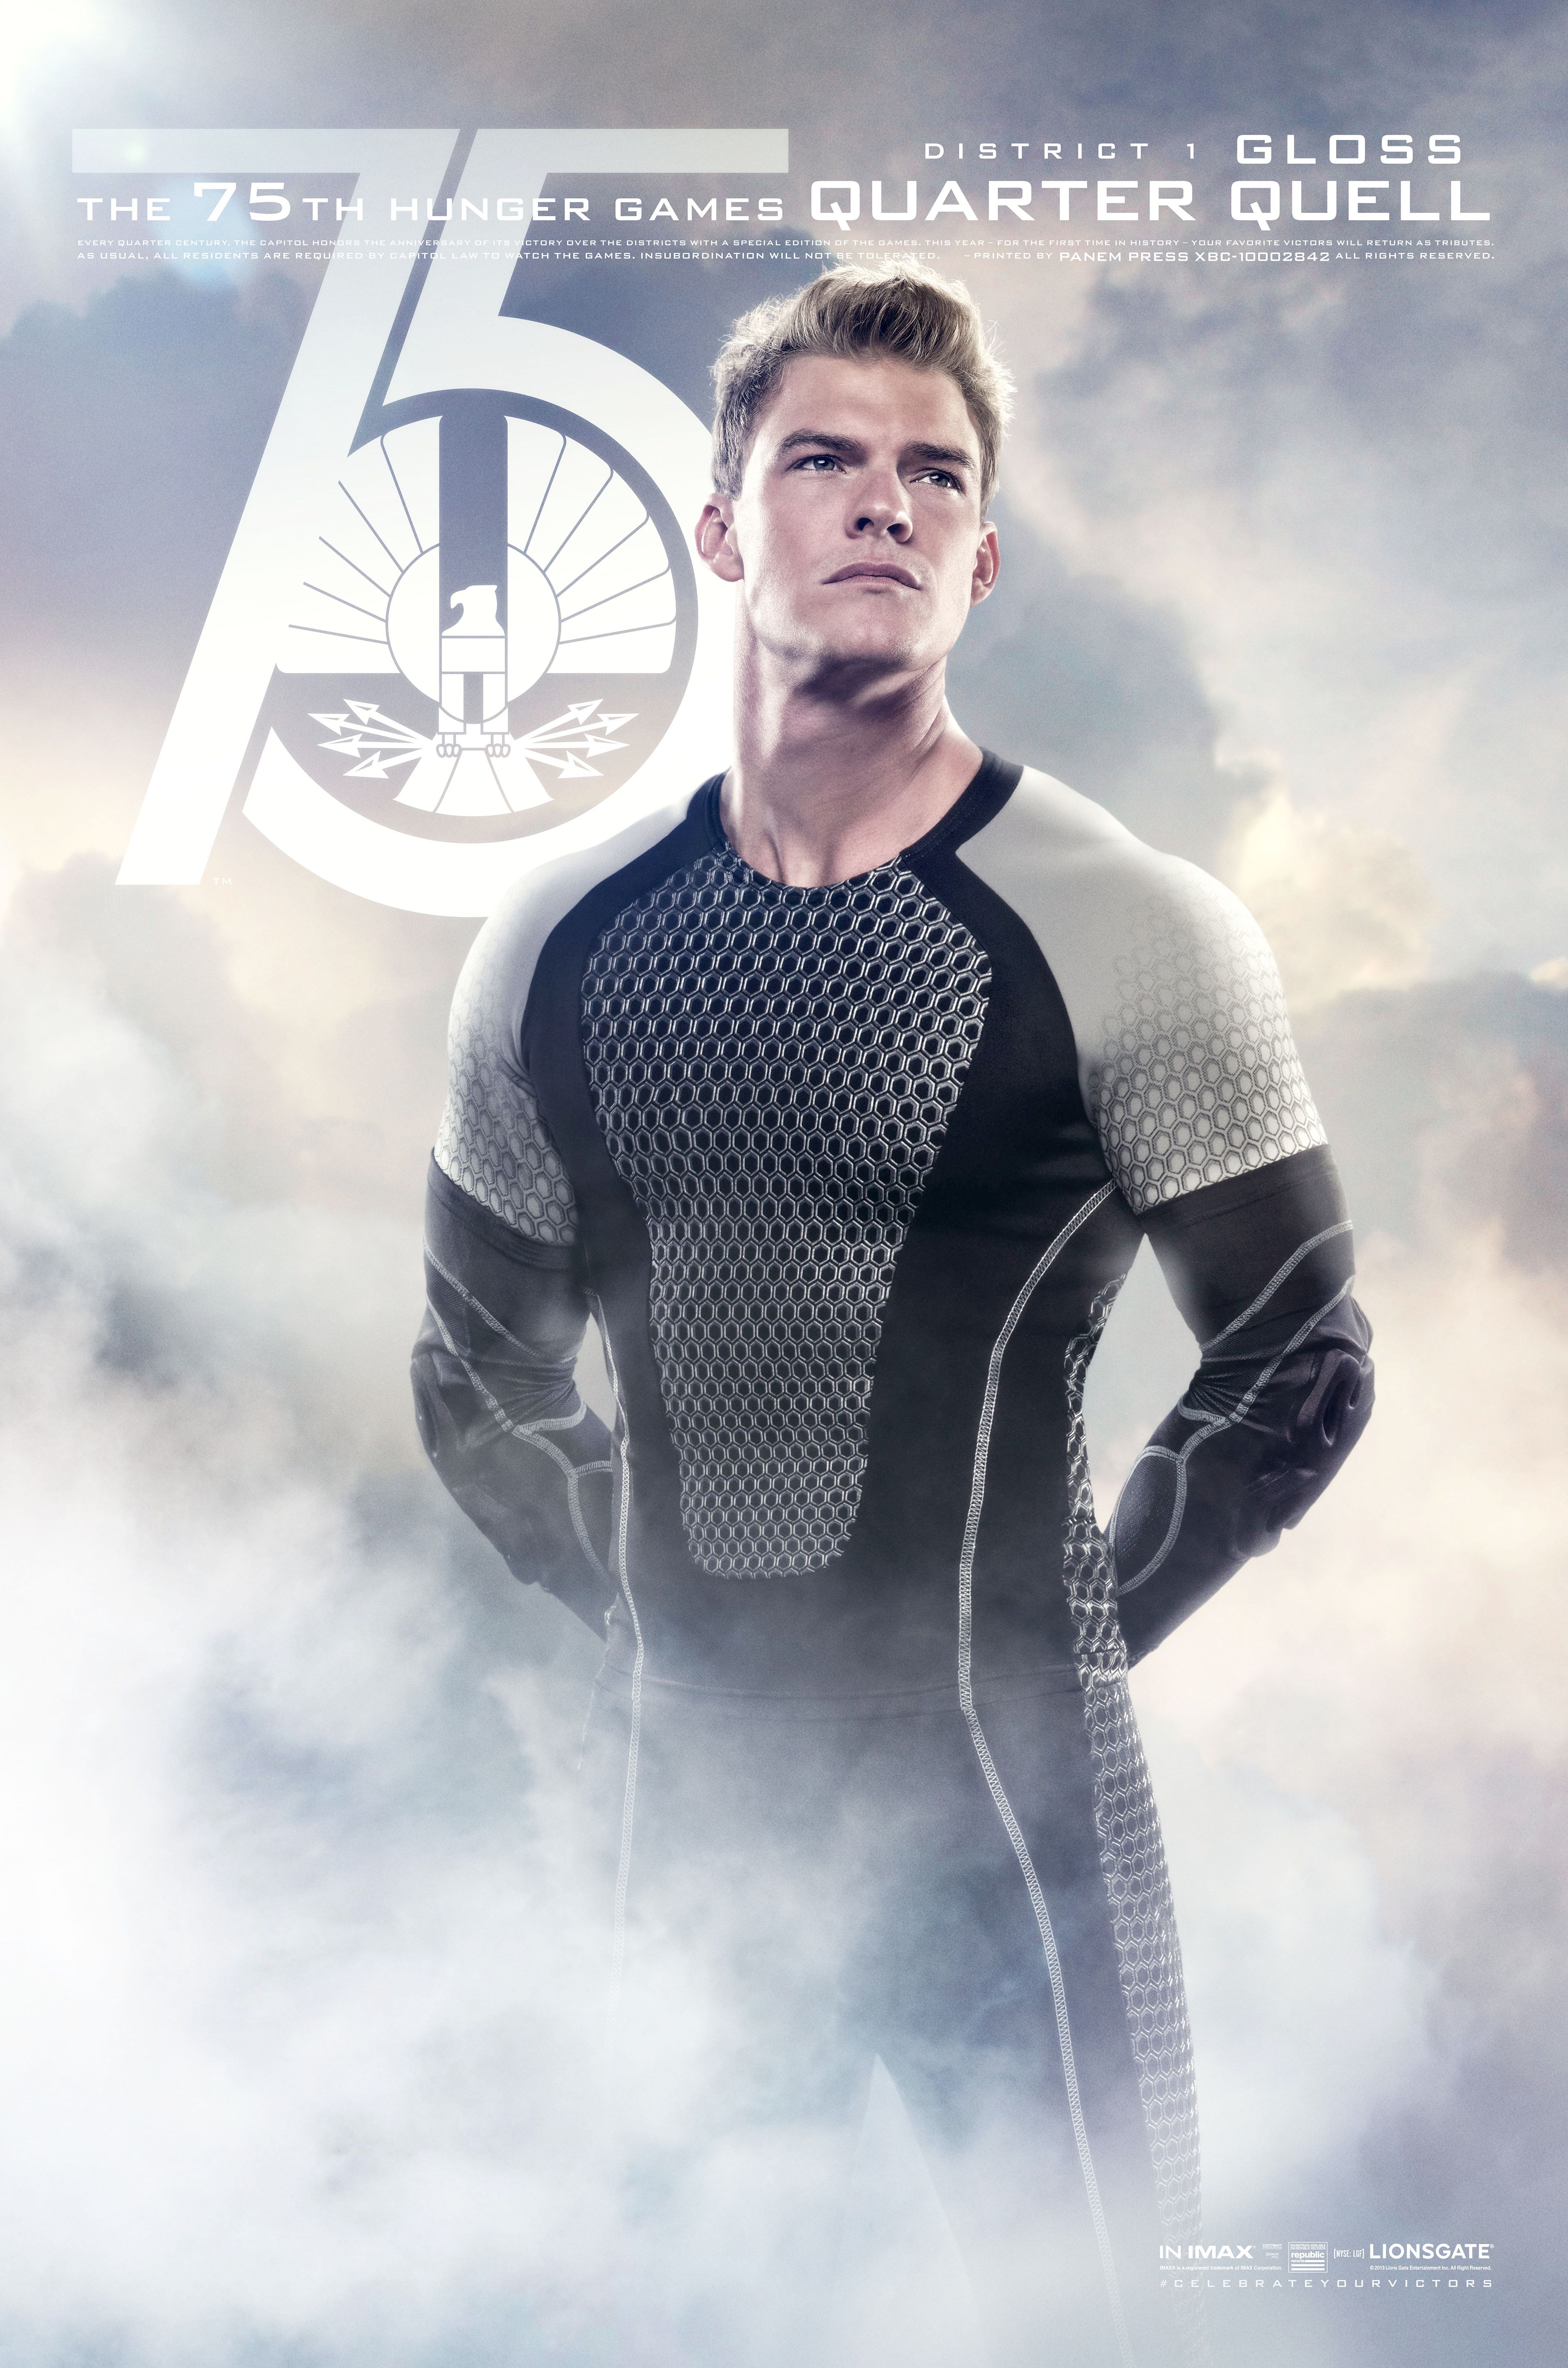 The Hunger Games Catching Fire Gloss Poster